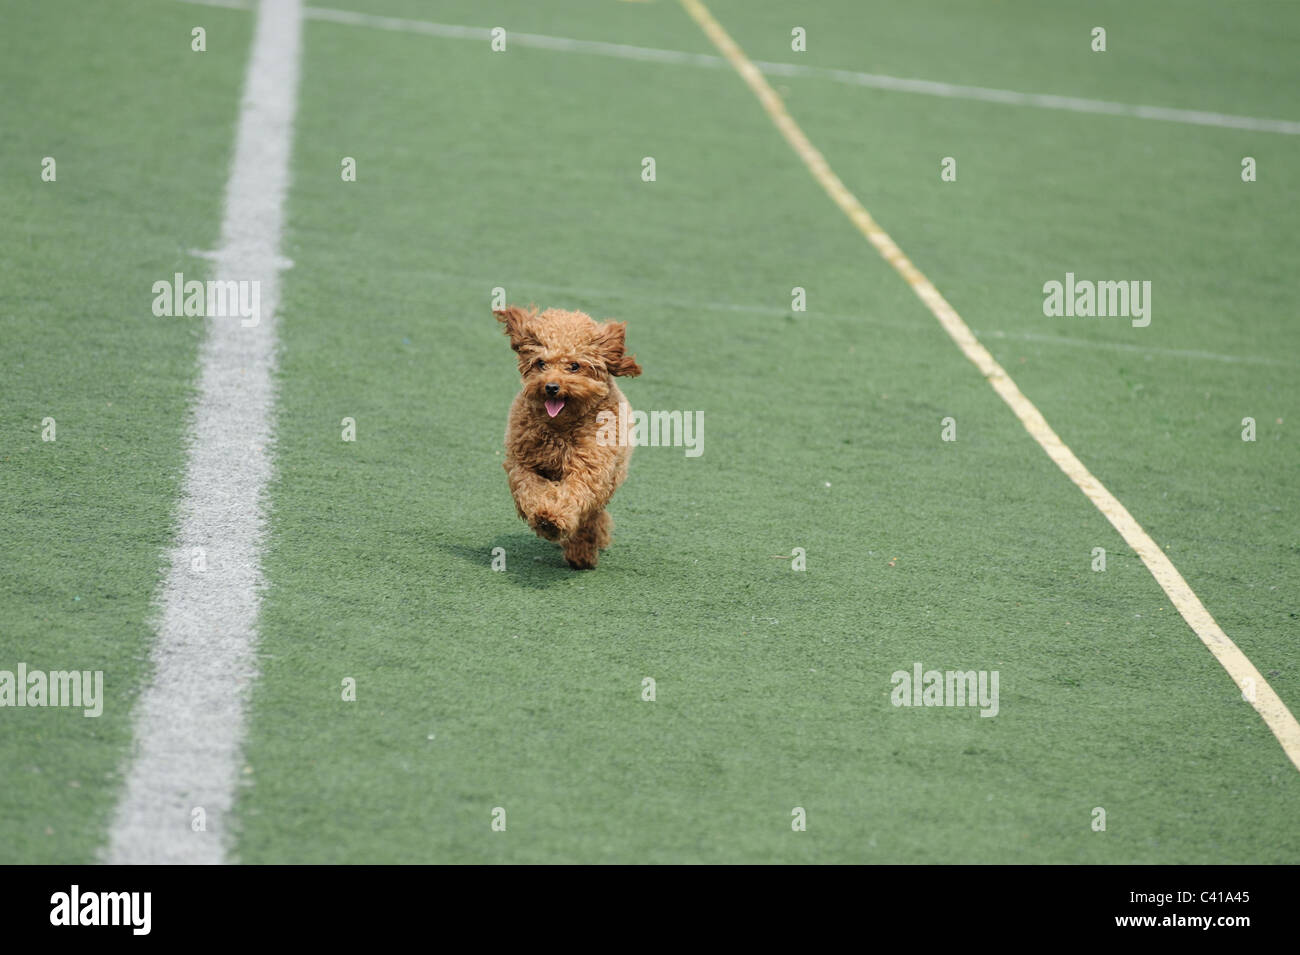 Lovely little poodle dog running on the playground Stock Photo